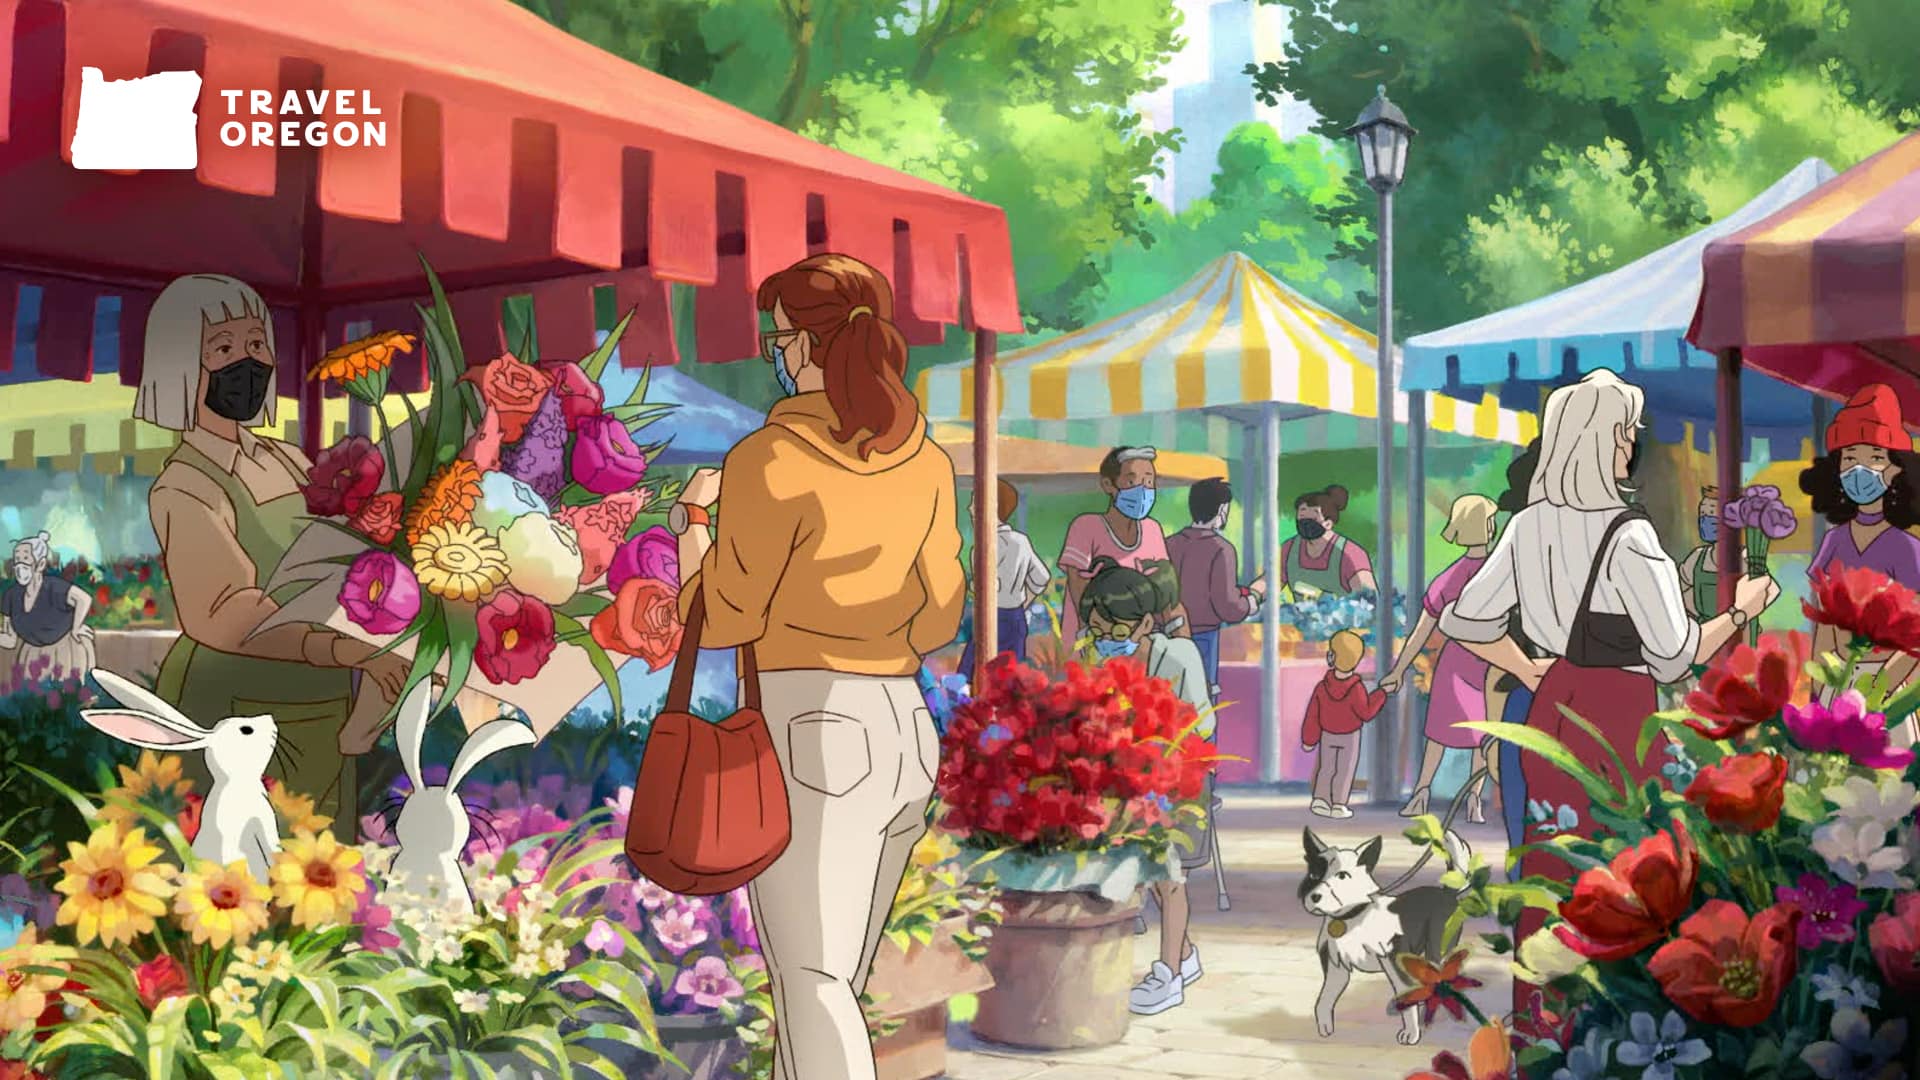 People shopping at colorful farmers market.